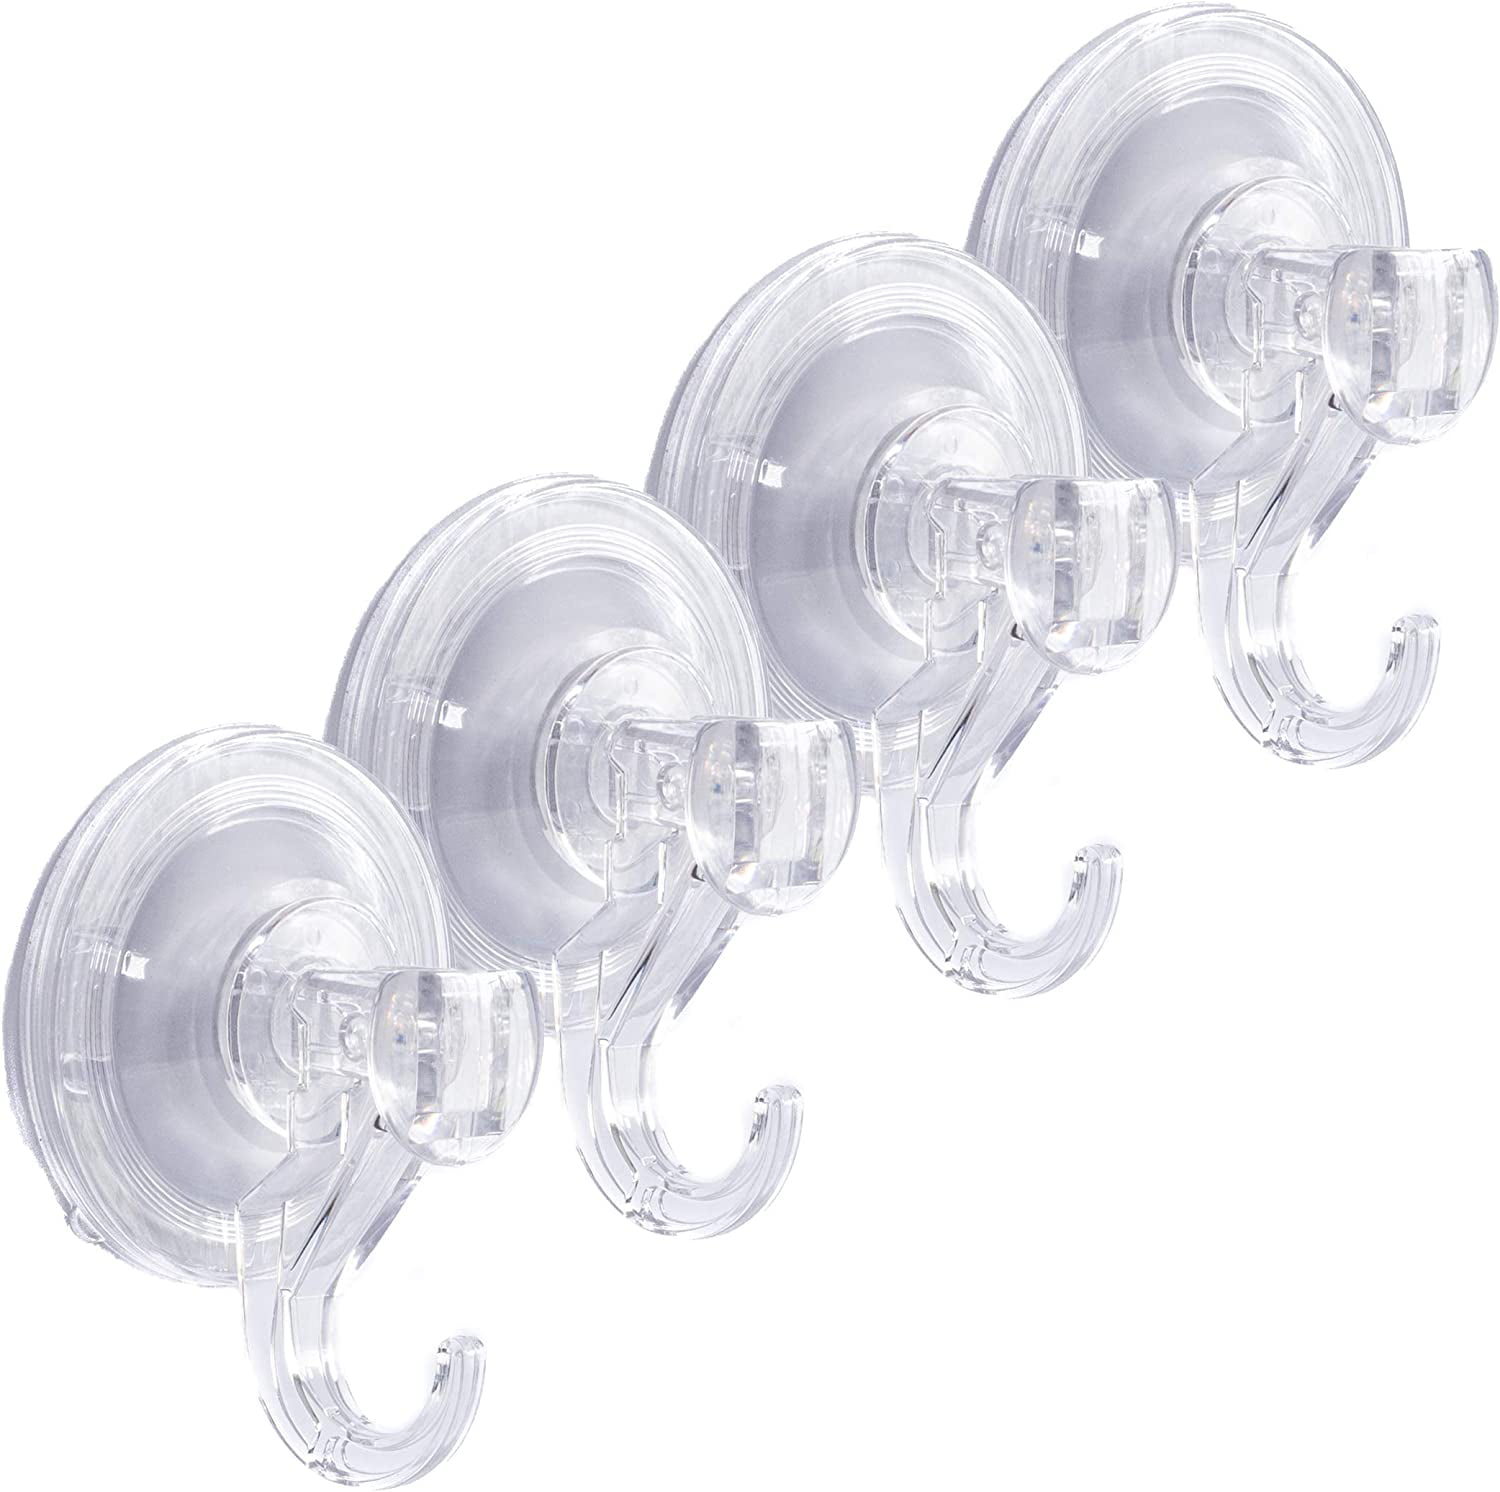 Suction Cups with Hooks - Large S-16143 - Uline